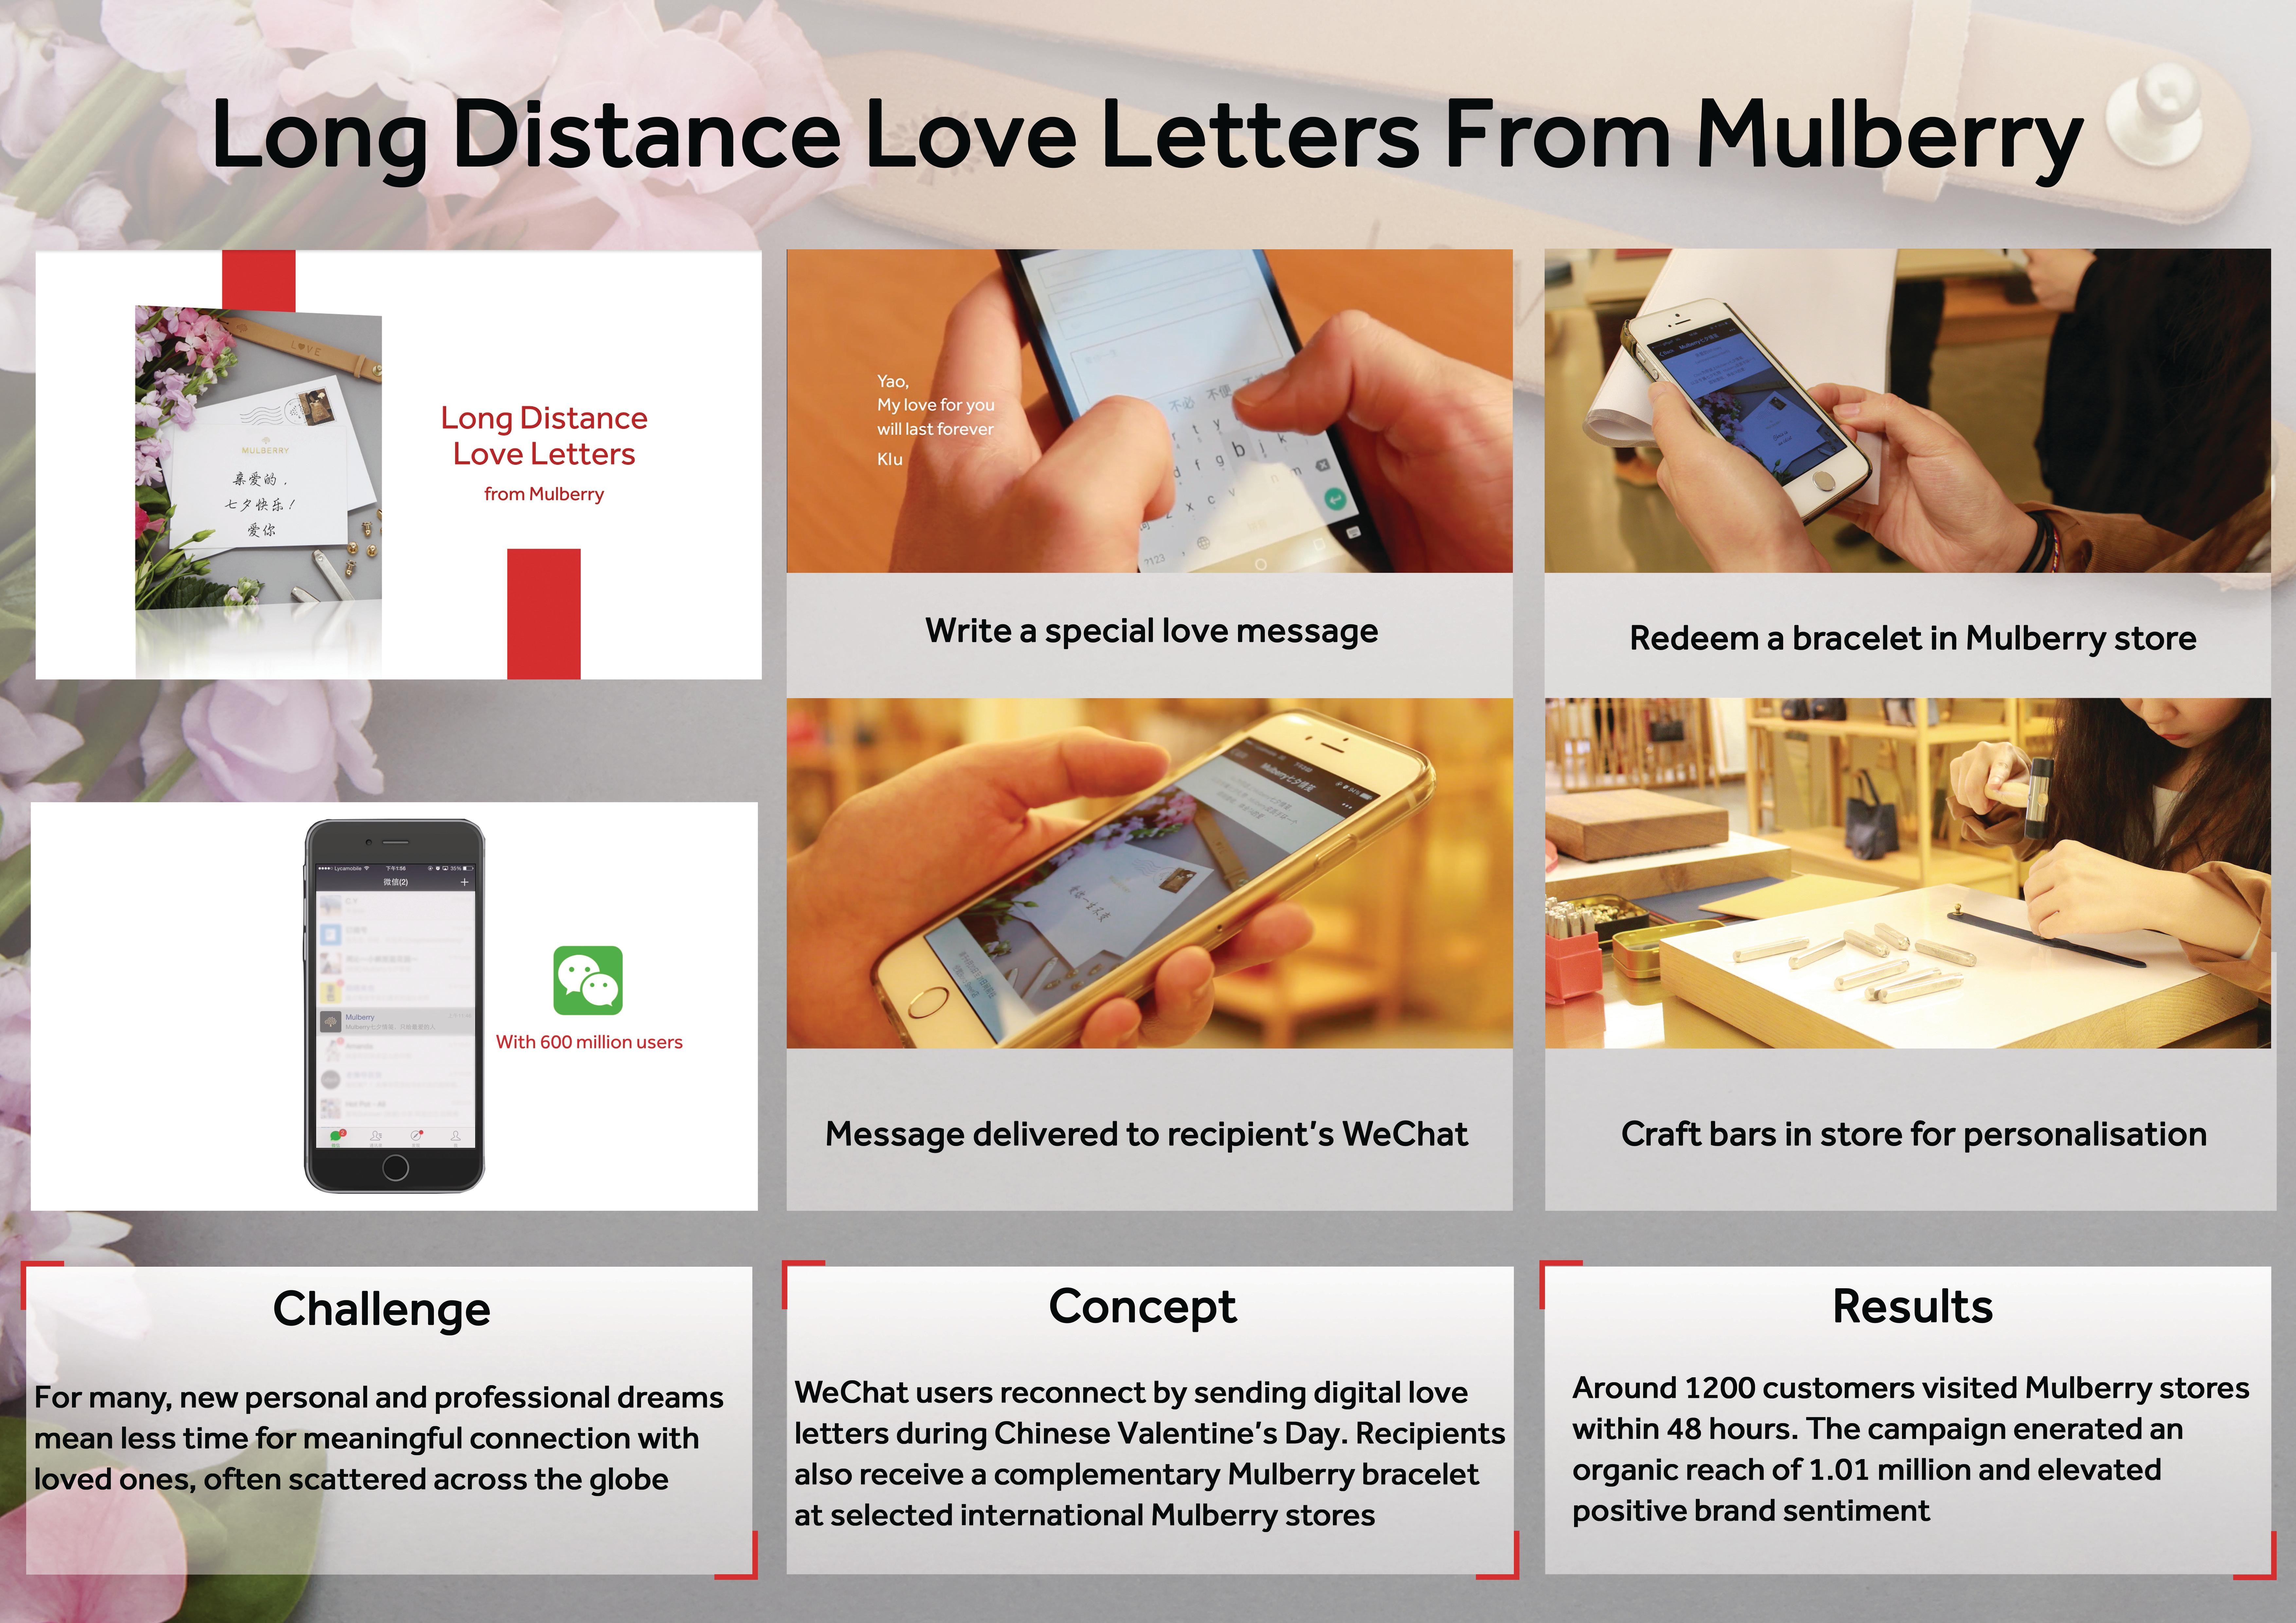 Long Distance Love Letters from Mulberry